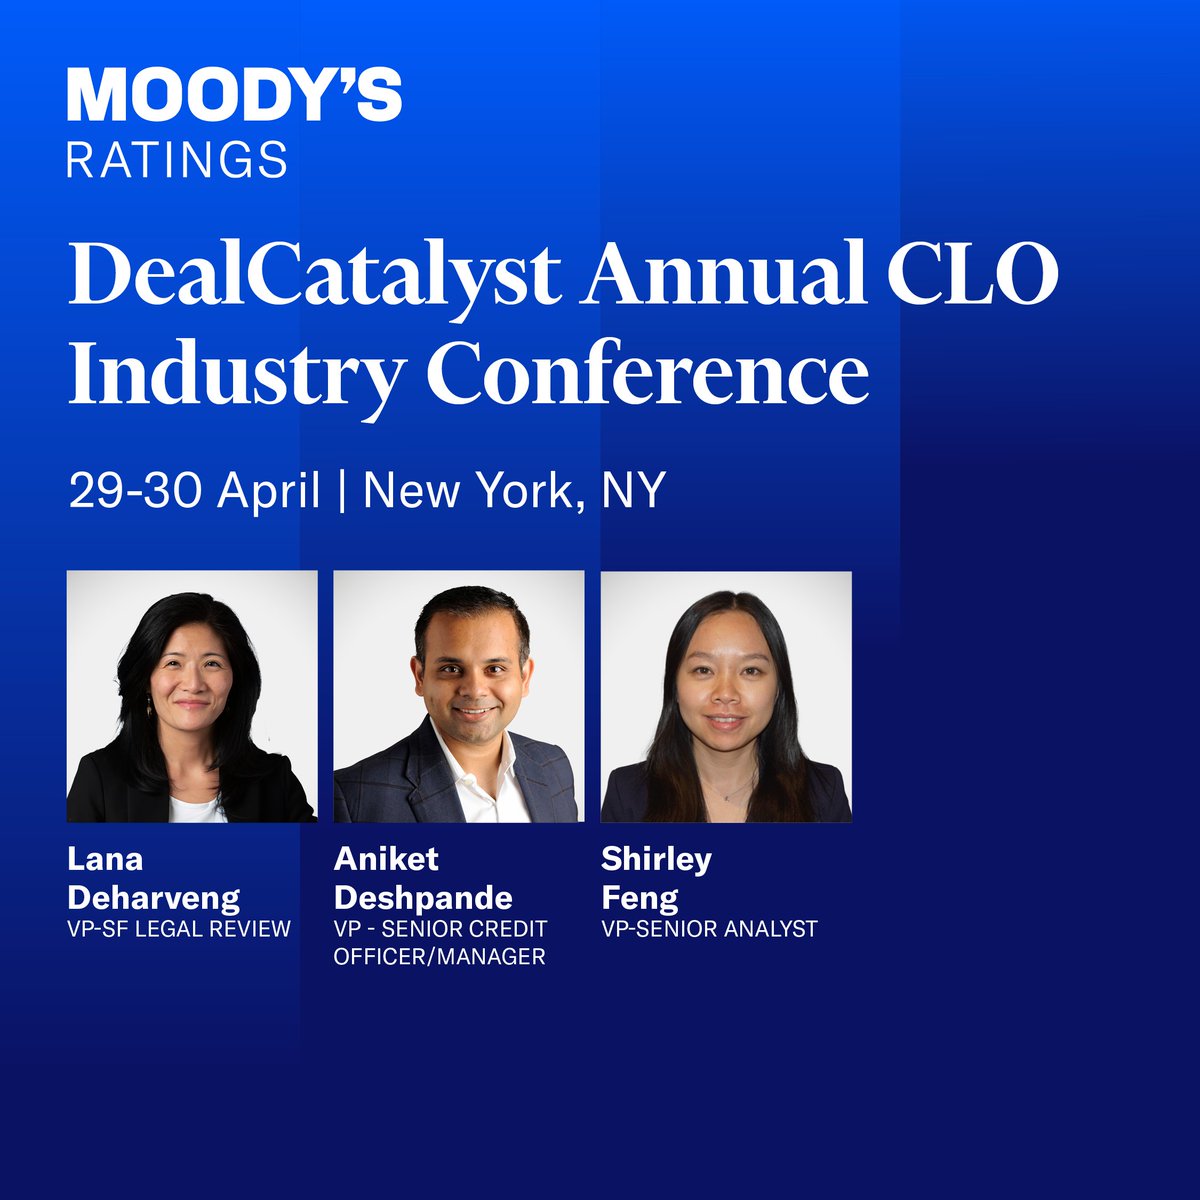 We are proud to sponsor the Annual CLO Industry Conference in New York on 29-30 April, co-hosted by the LSTA and DealCatalyst. Come hear Moody’s speakers sharing their insights on the latest trends in the market. Register here: mdy.link/3Ua7bH1